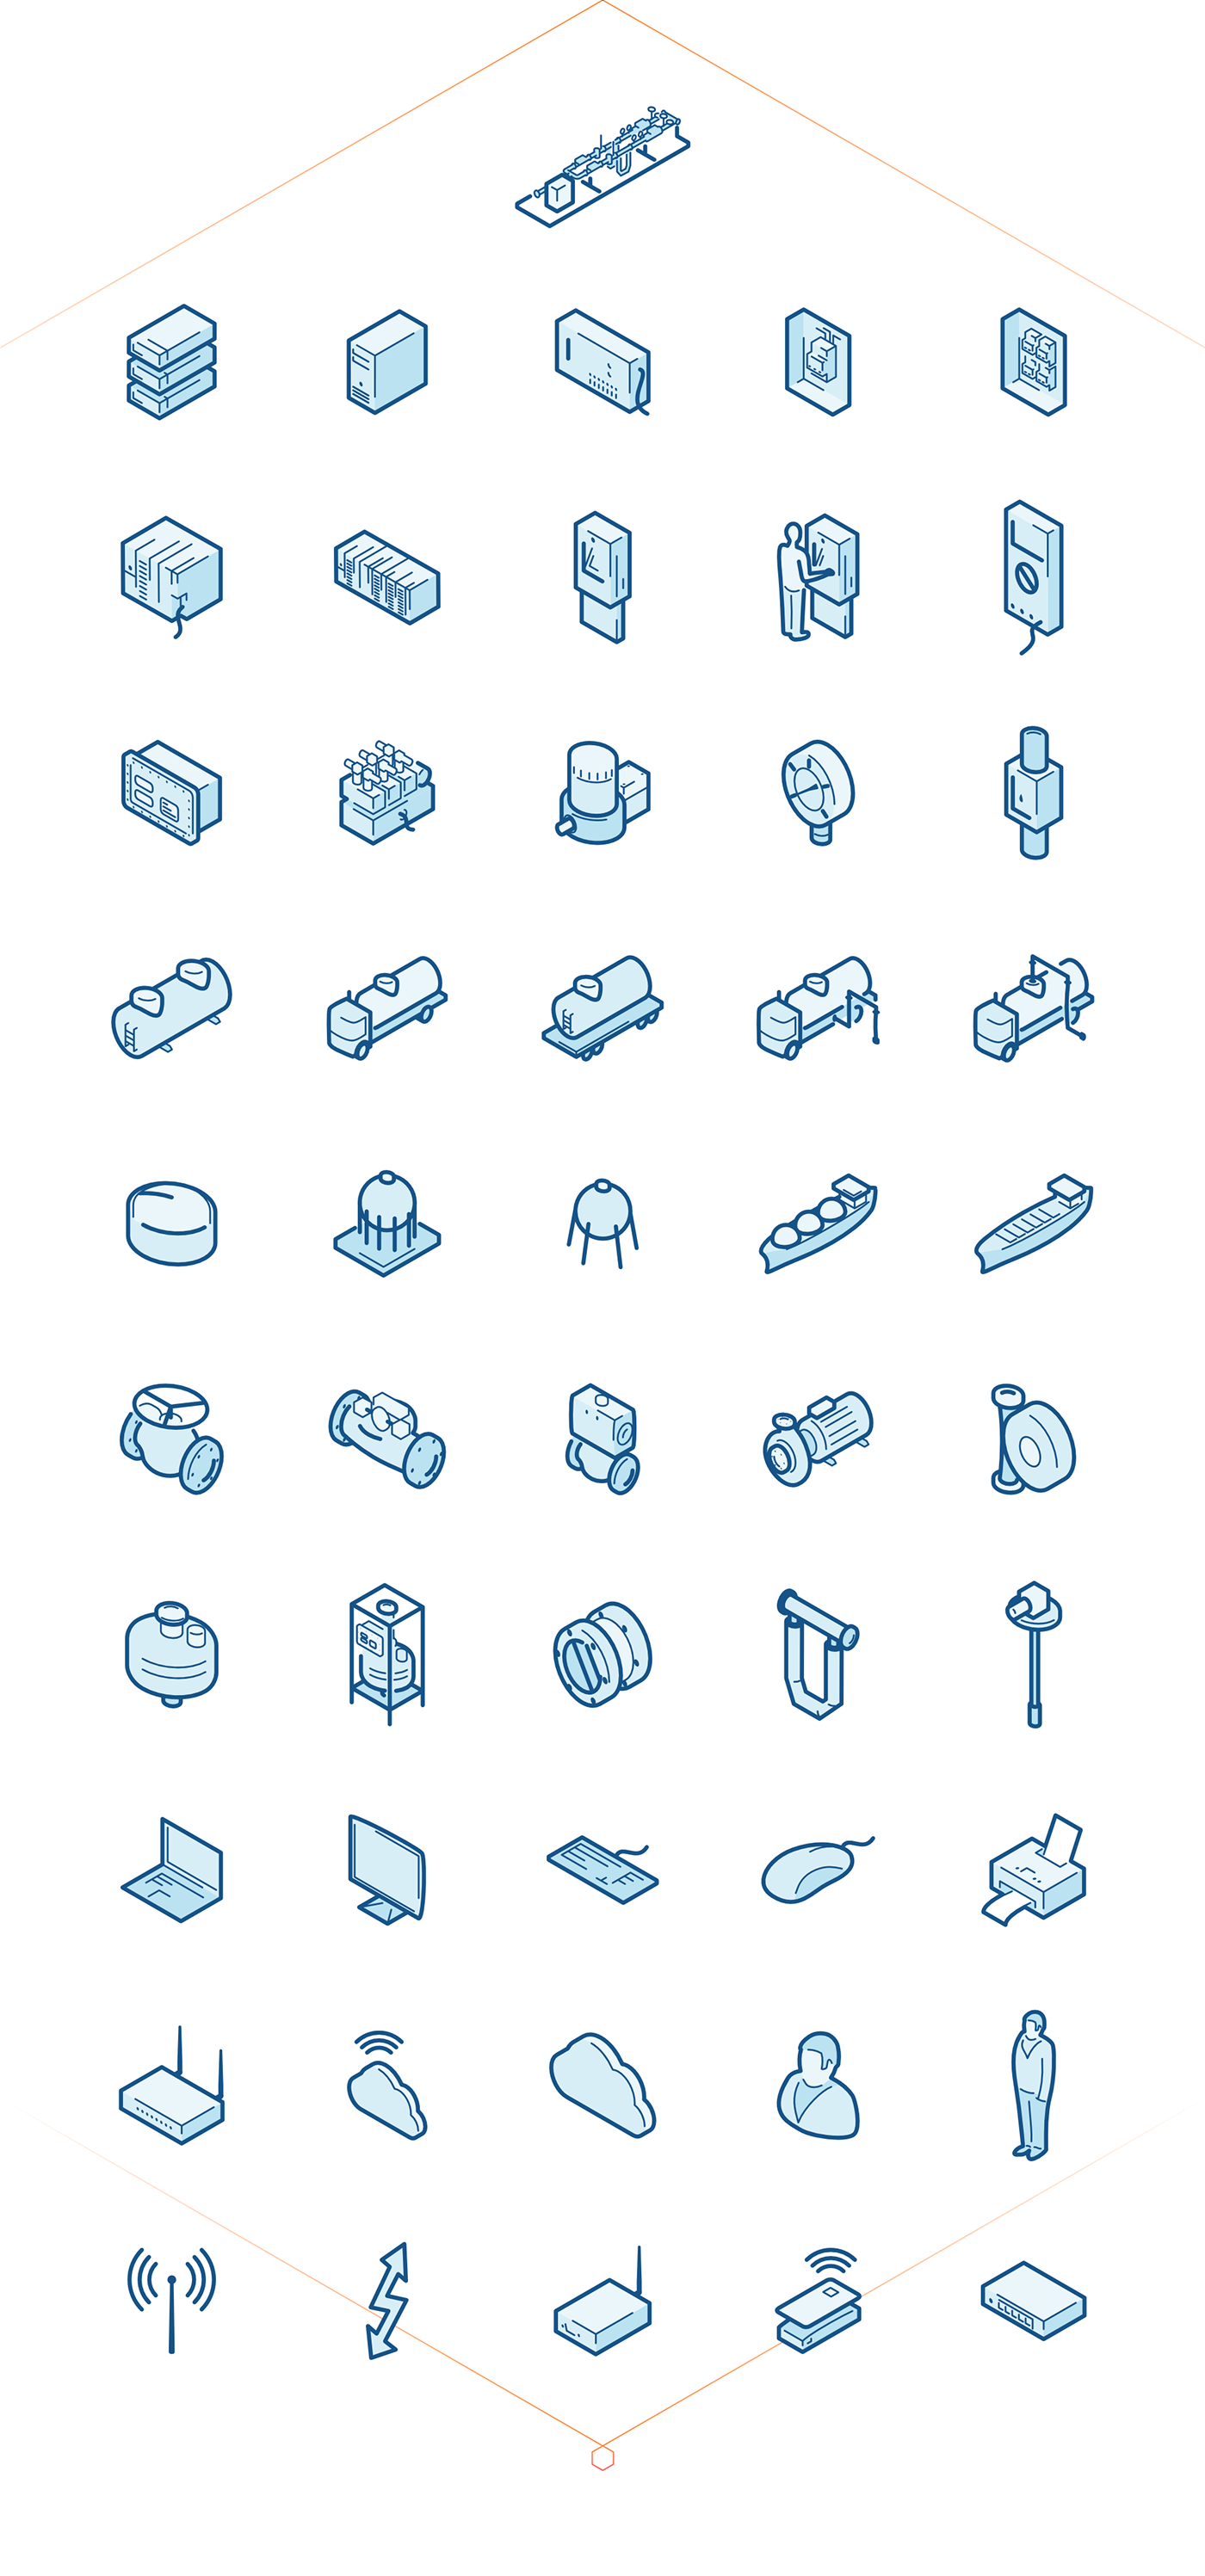 environment factory graphic design  iconography icons ILLUSTRATION  ortographic Petrochemistry refinery vector